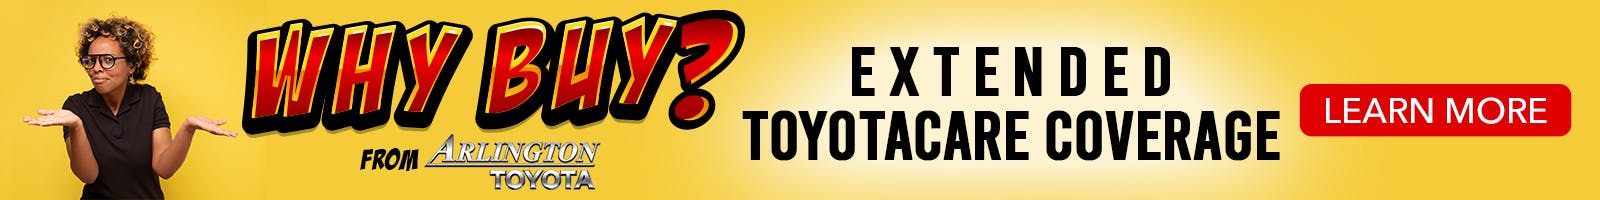 Why Buy Toyotacare